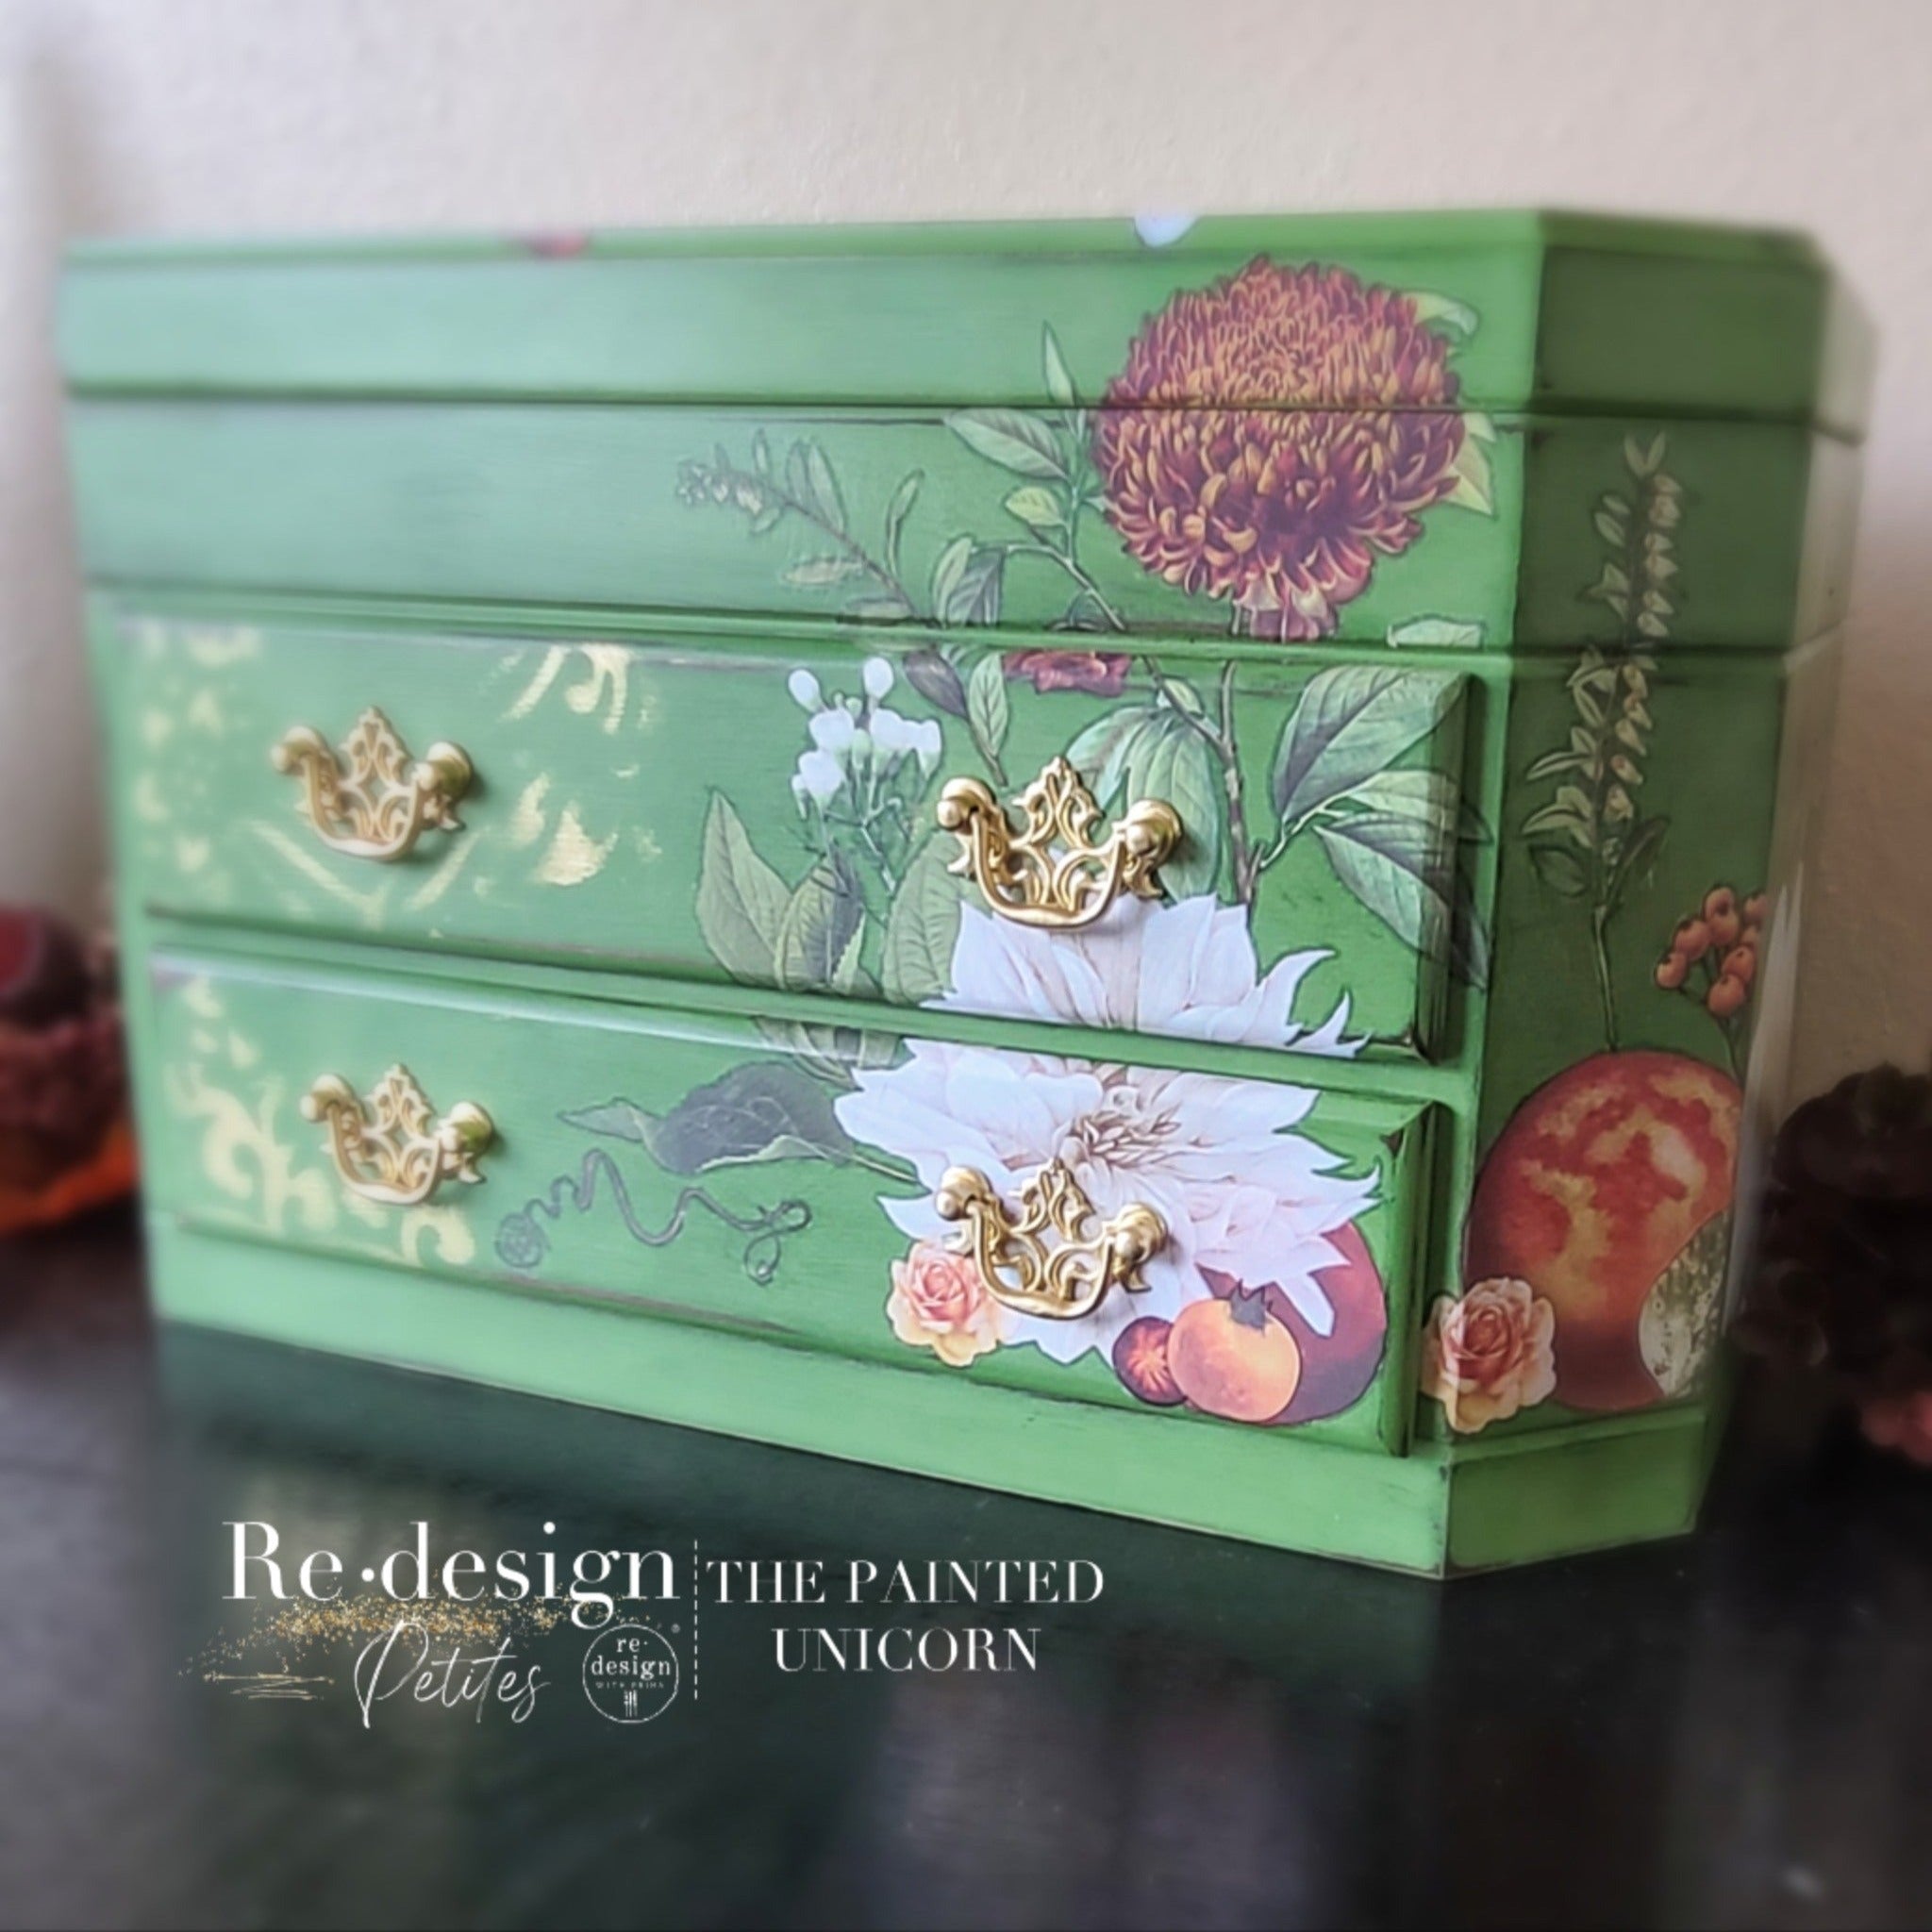 A small vintage jewelry box refurbished by The Painted Unicorn is painted Spring green and features ReDesign with Prima's Seasonal Splendor small transfer on it.